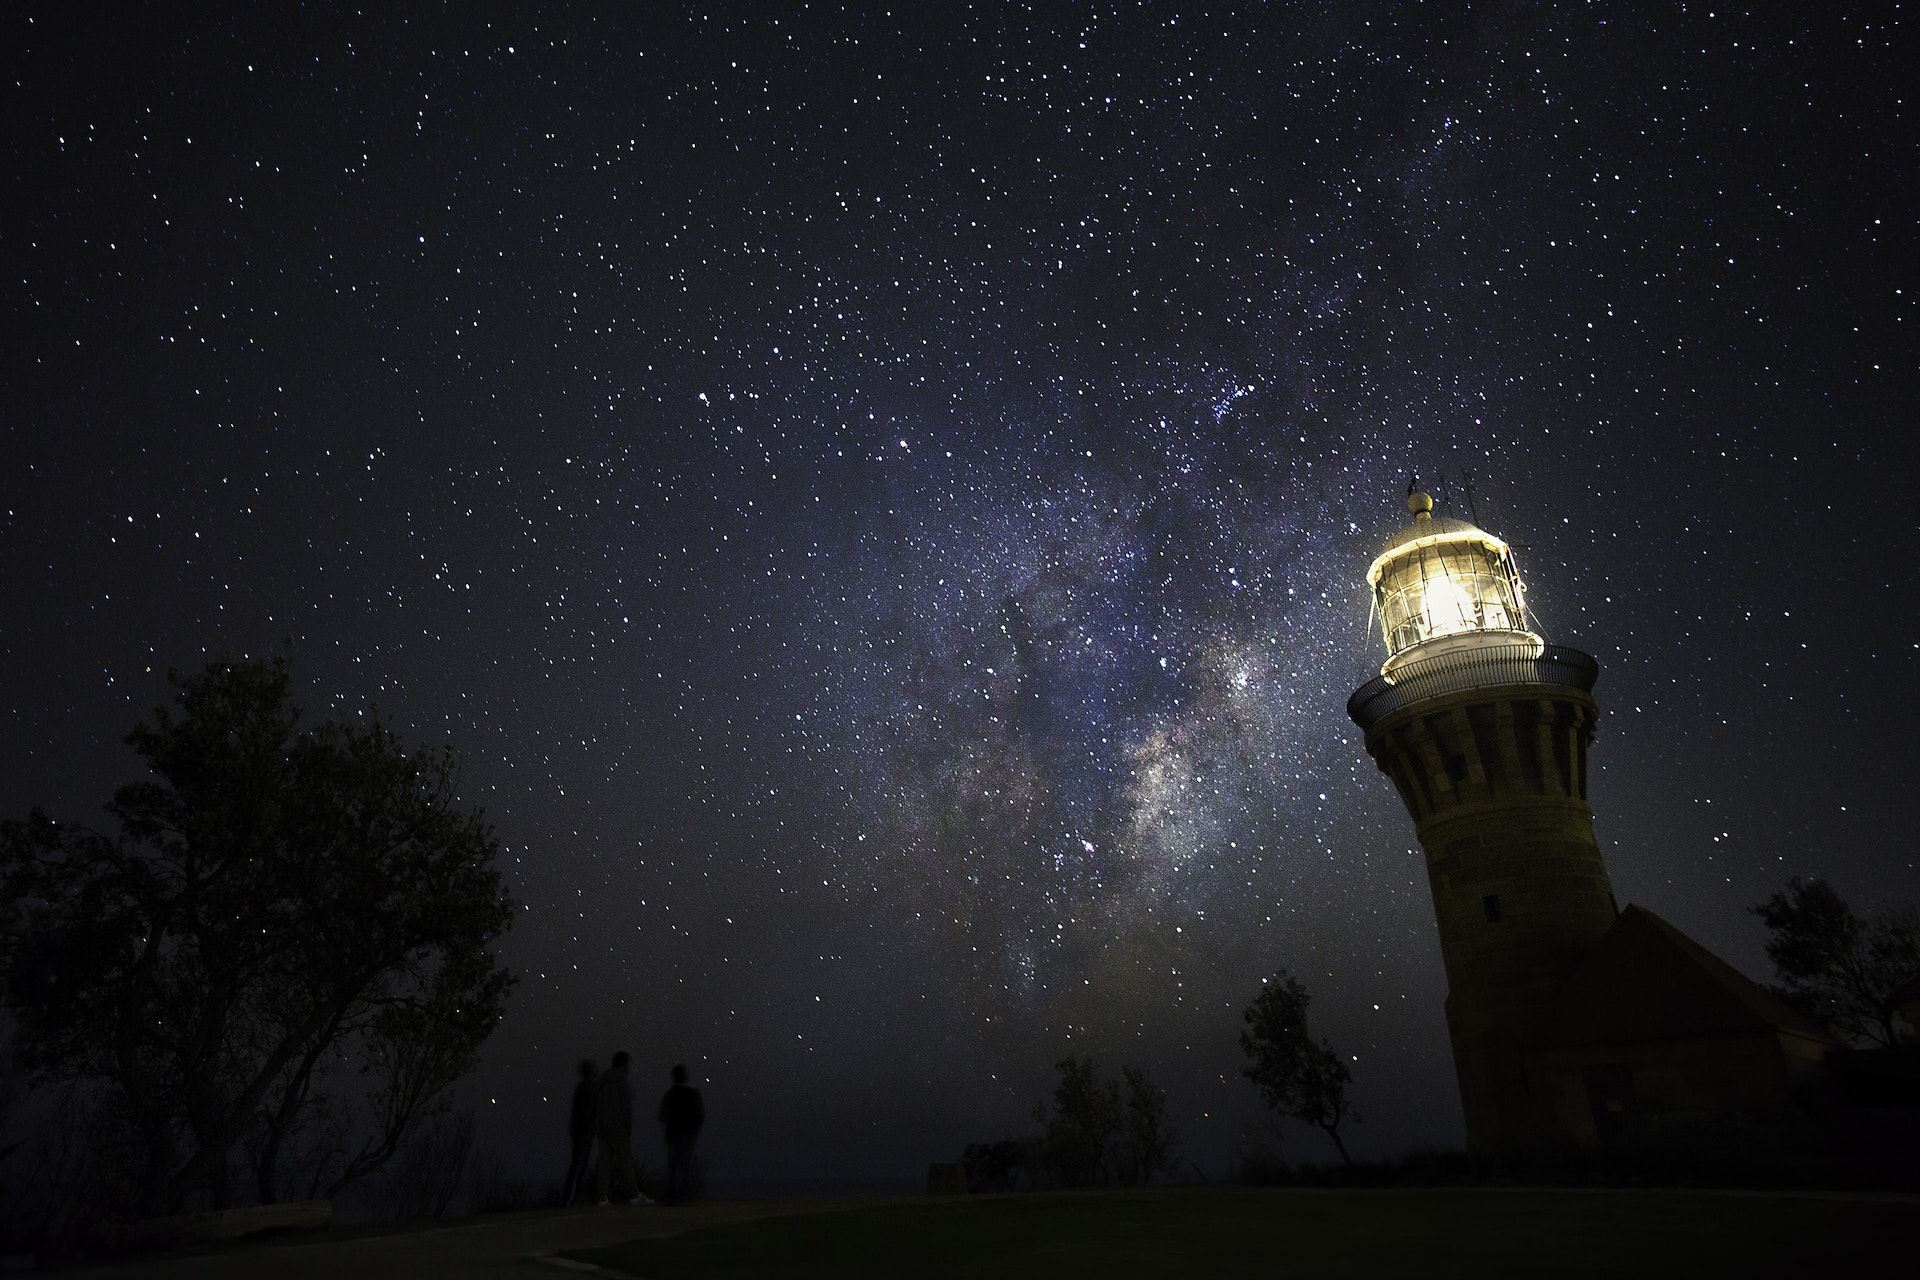 Barrenjoey lighthouse at night under the stars